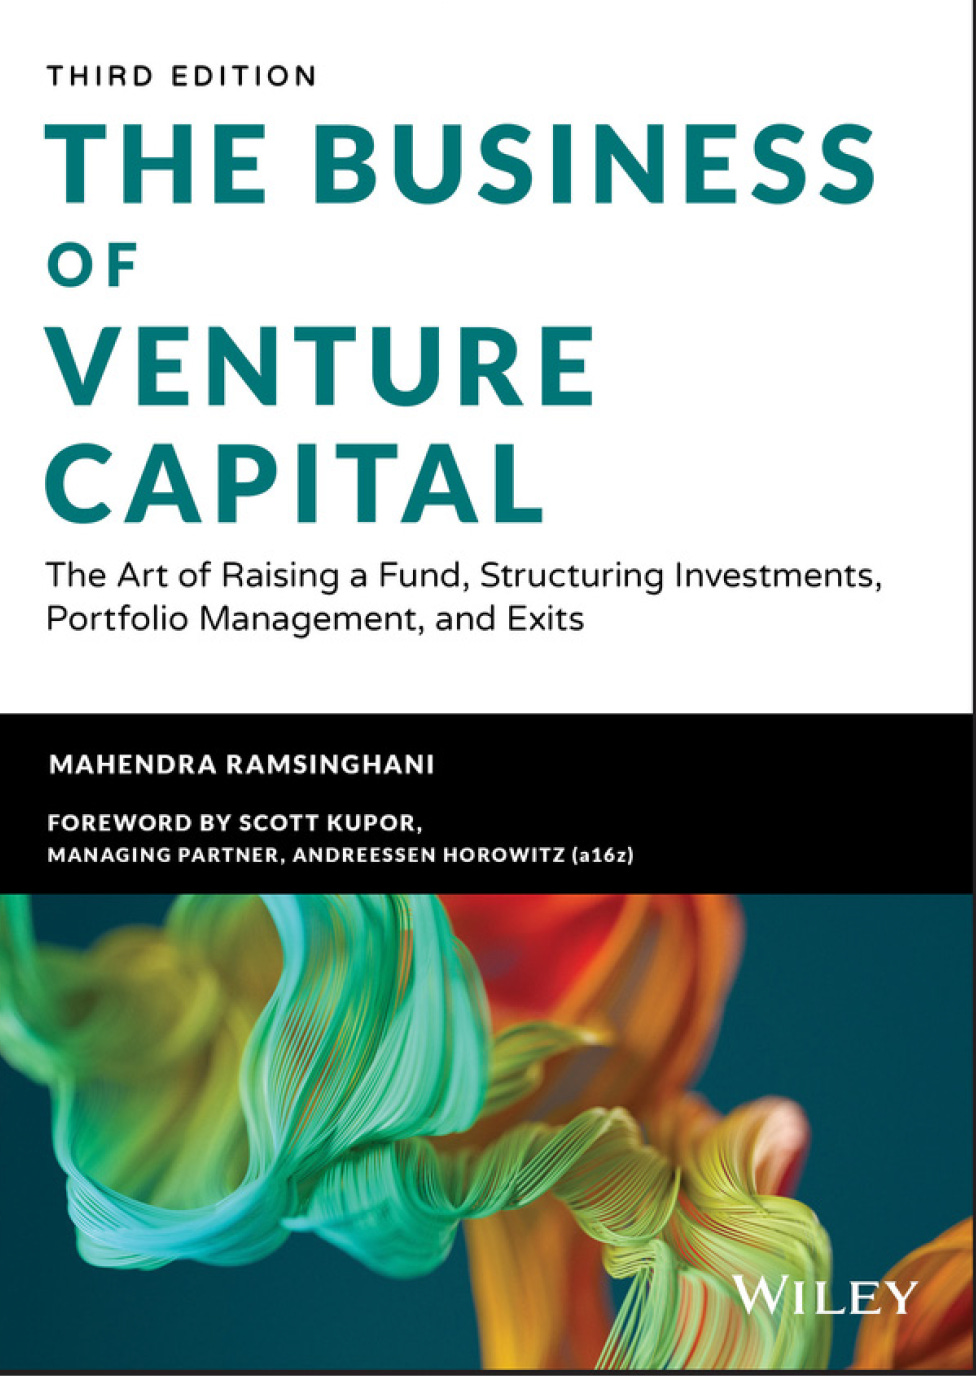 The Business of Venture Capital: The Art of Raising a Fund, Structuring Investments, Portfolio Management, and Exits by Mahendra Ramsinghani